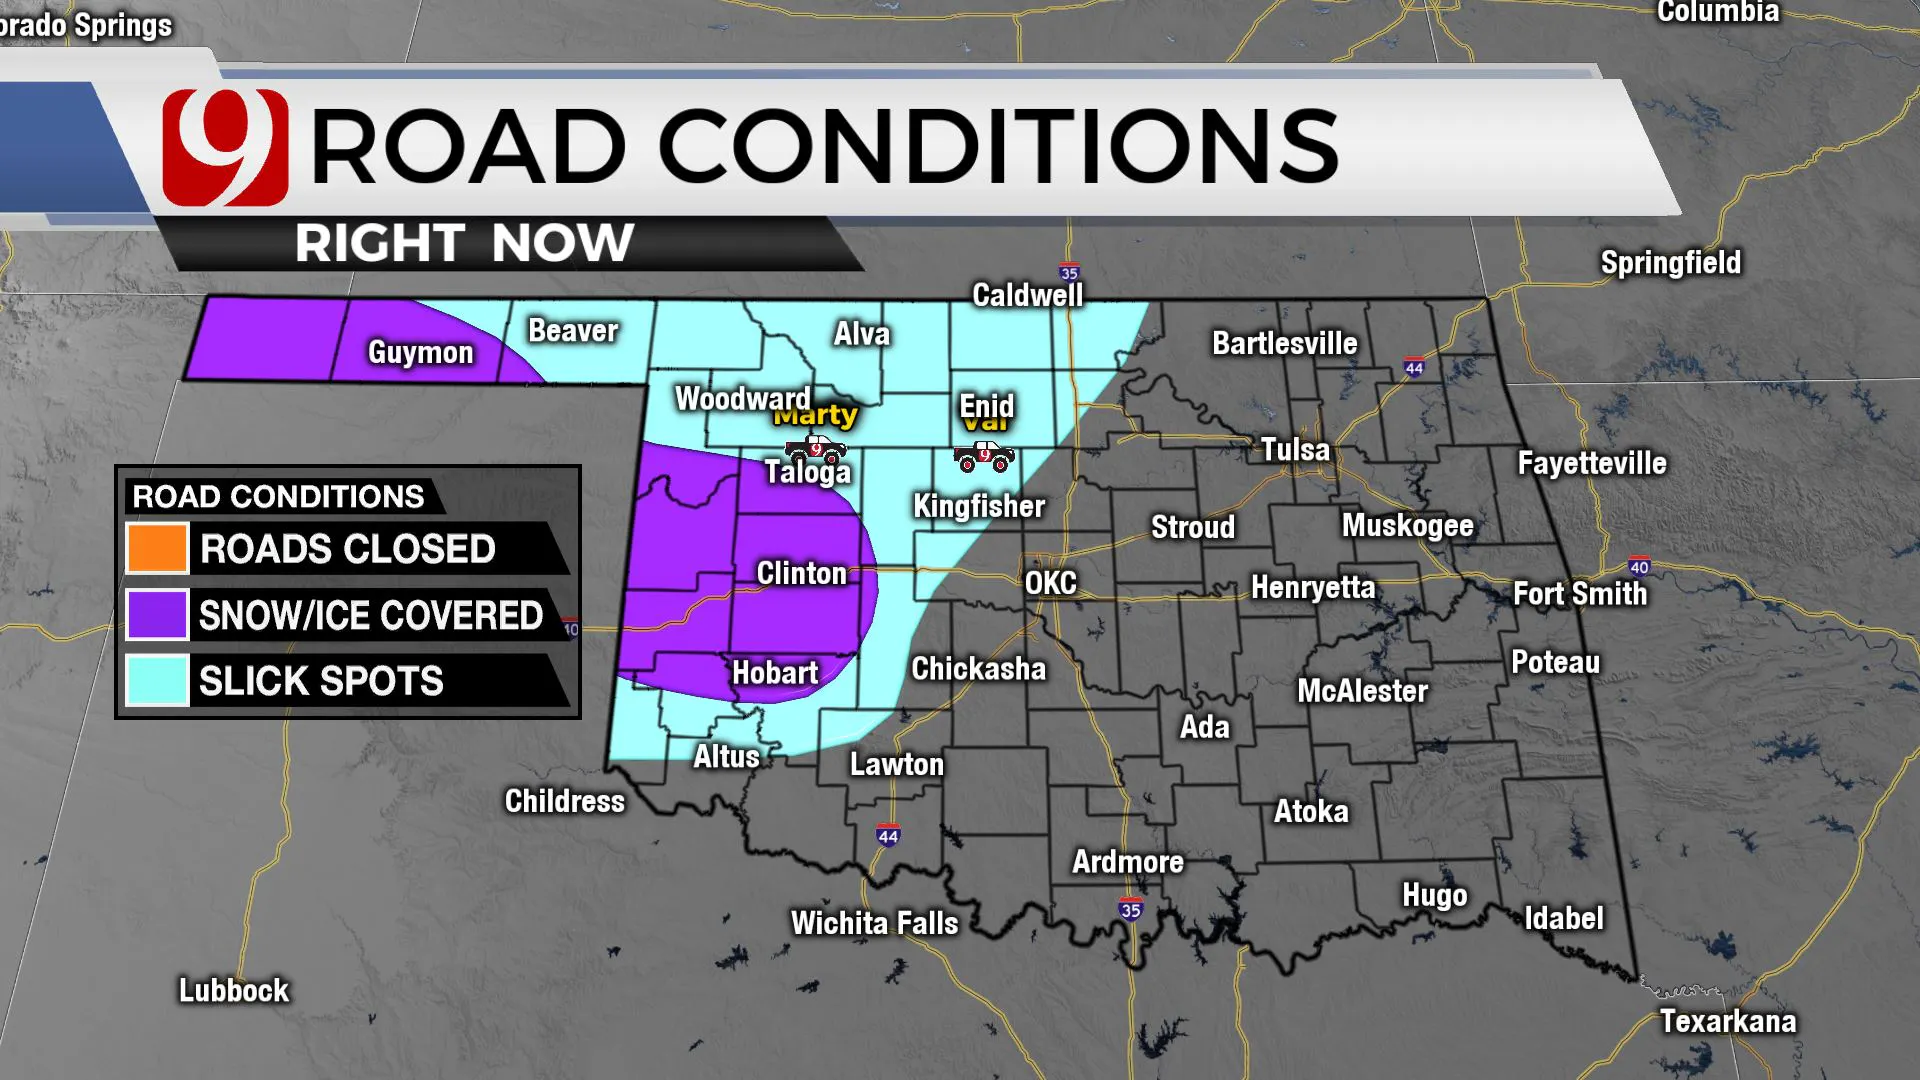 Road conditions for Tuesday.